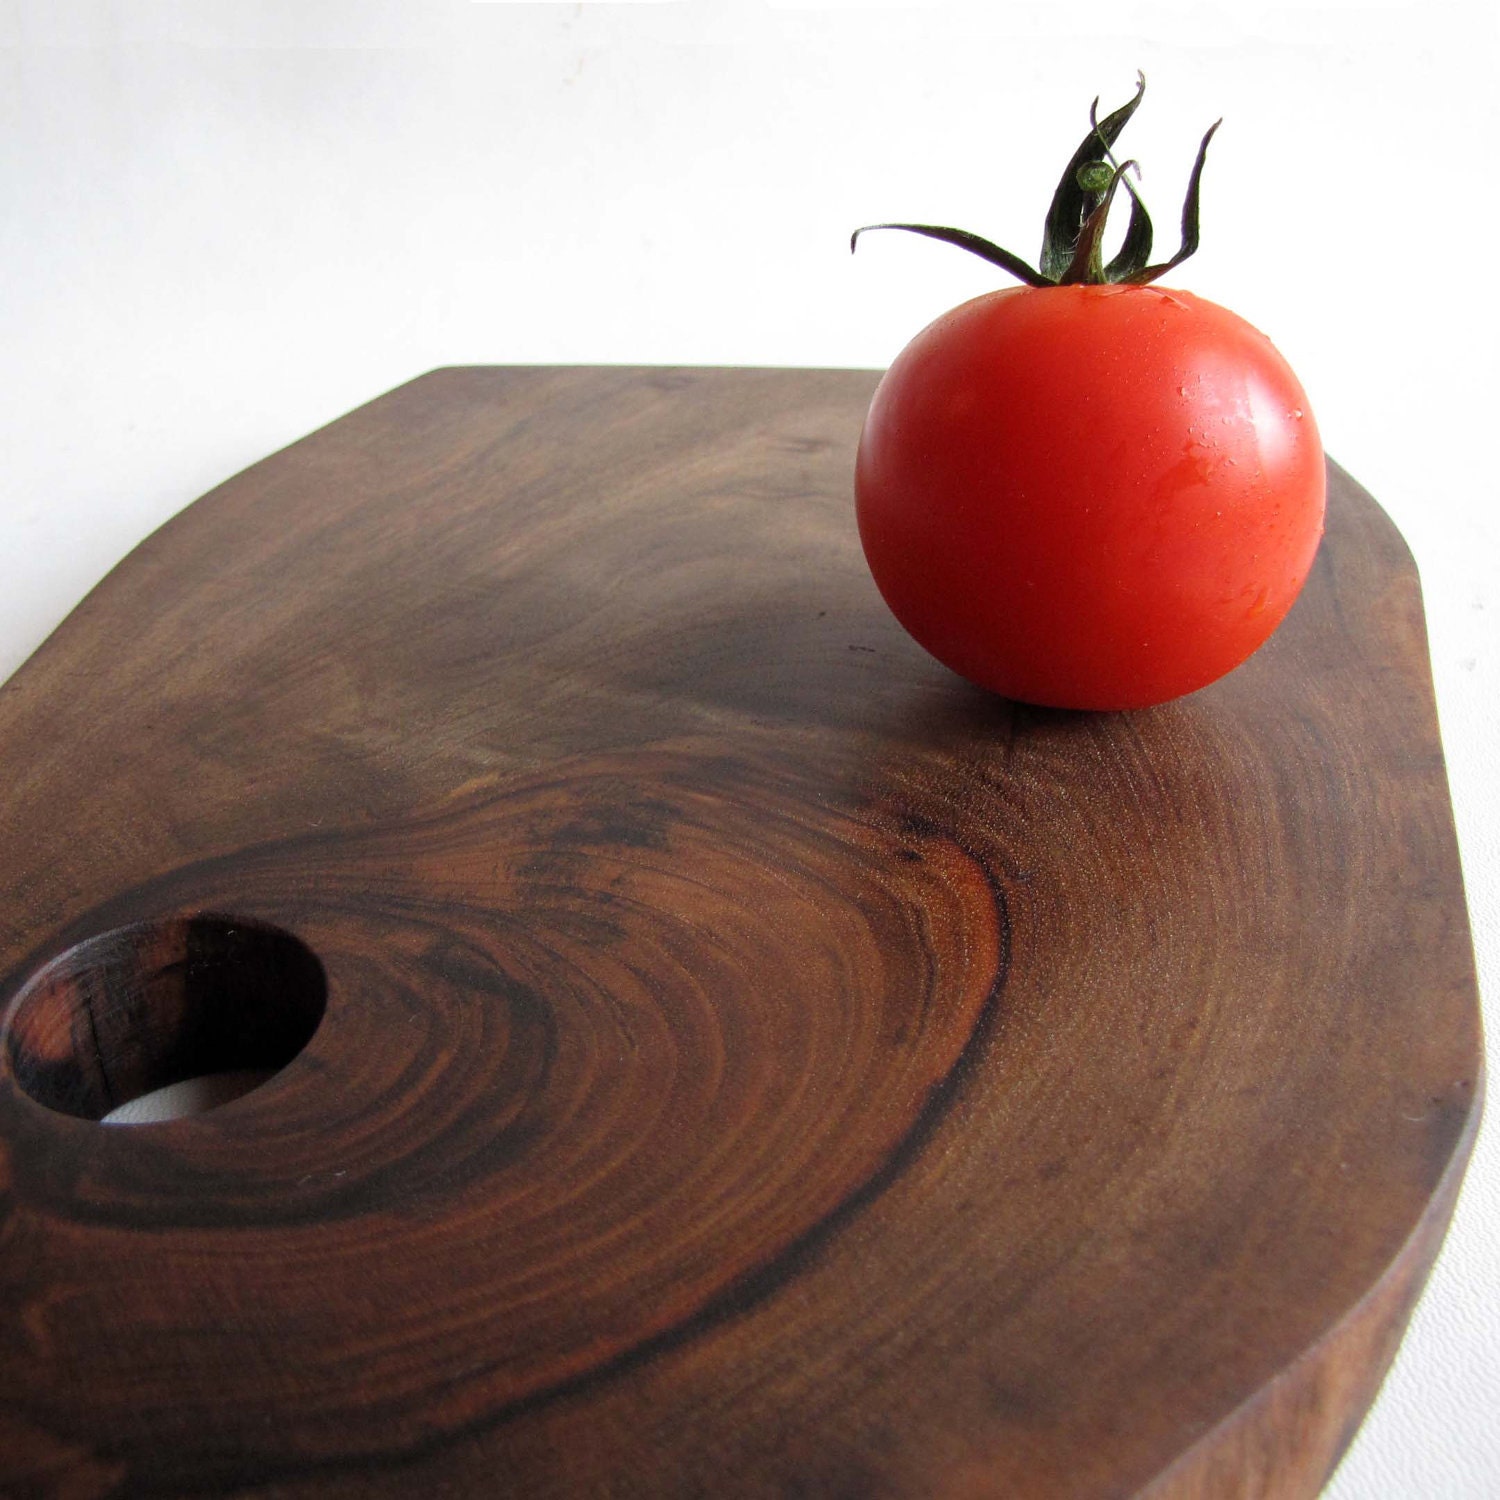 Cutting board / serving tray from walnut tree branch - natural edge - can be personalized